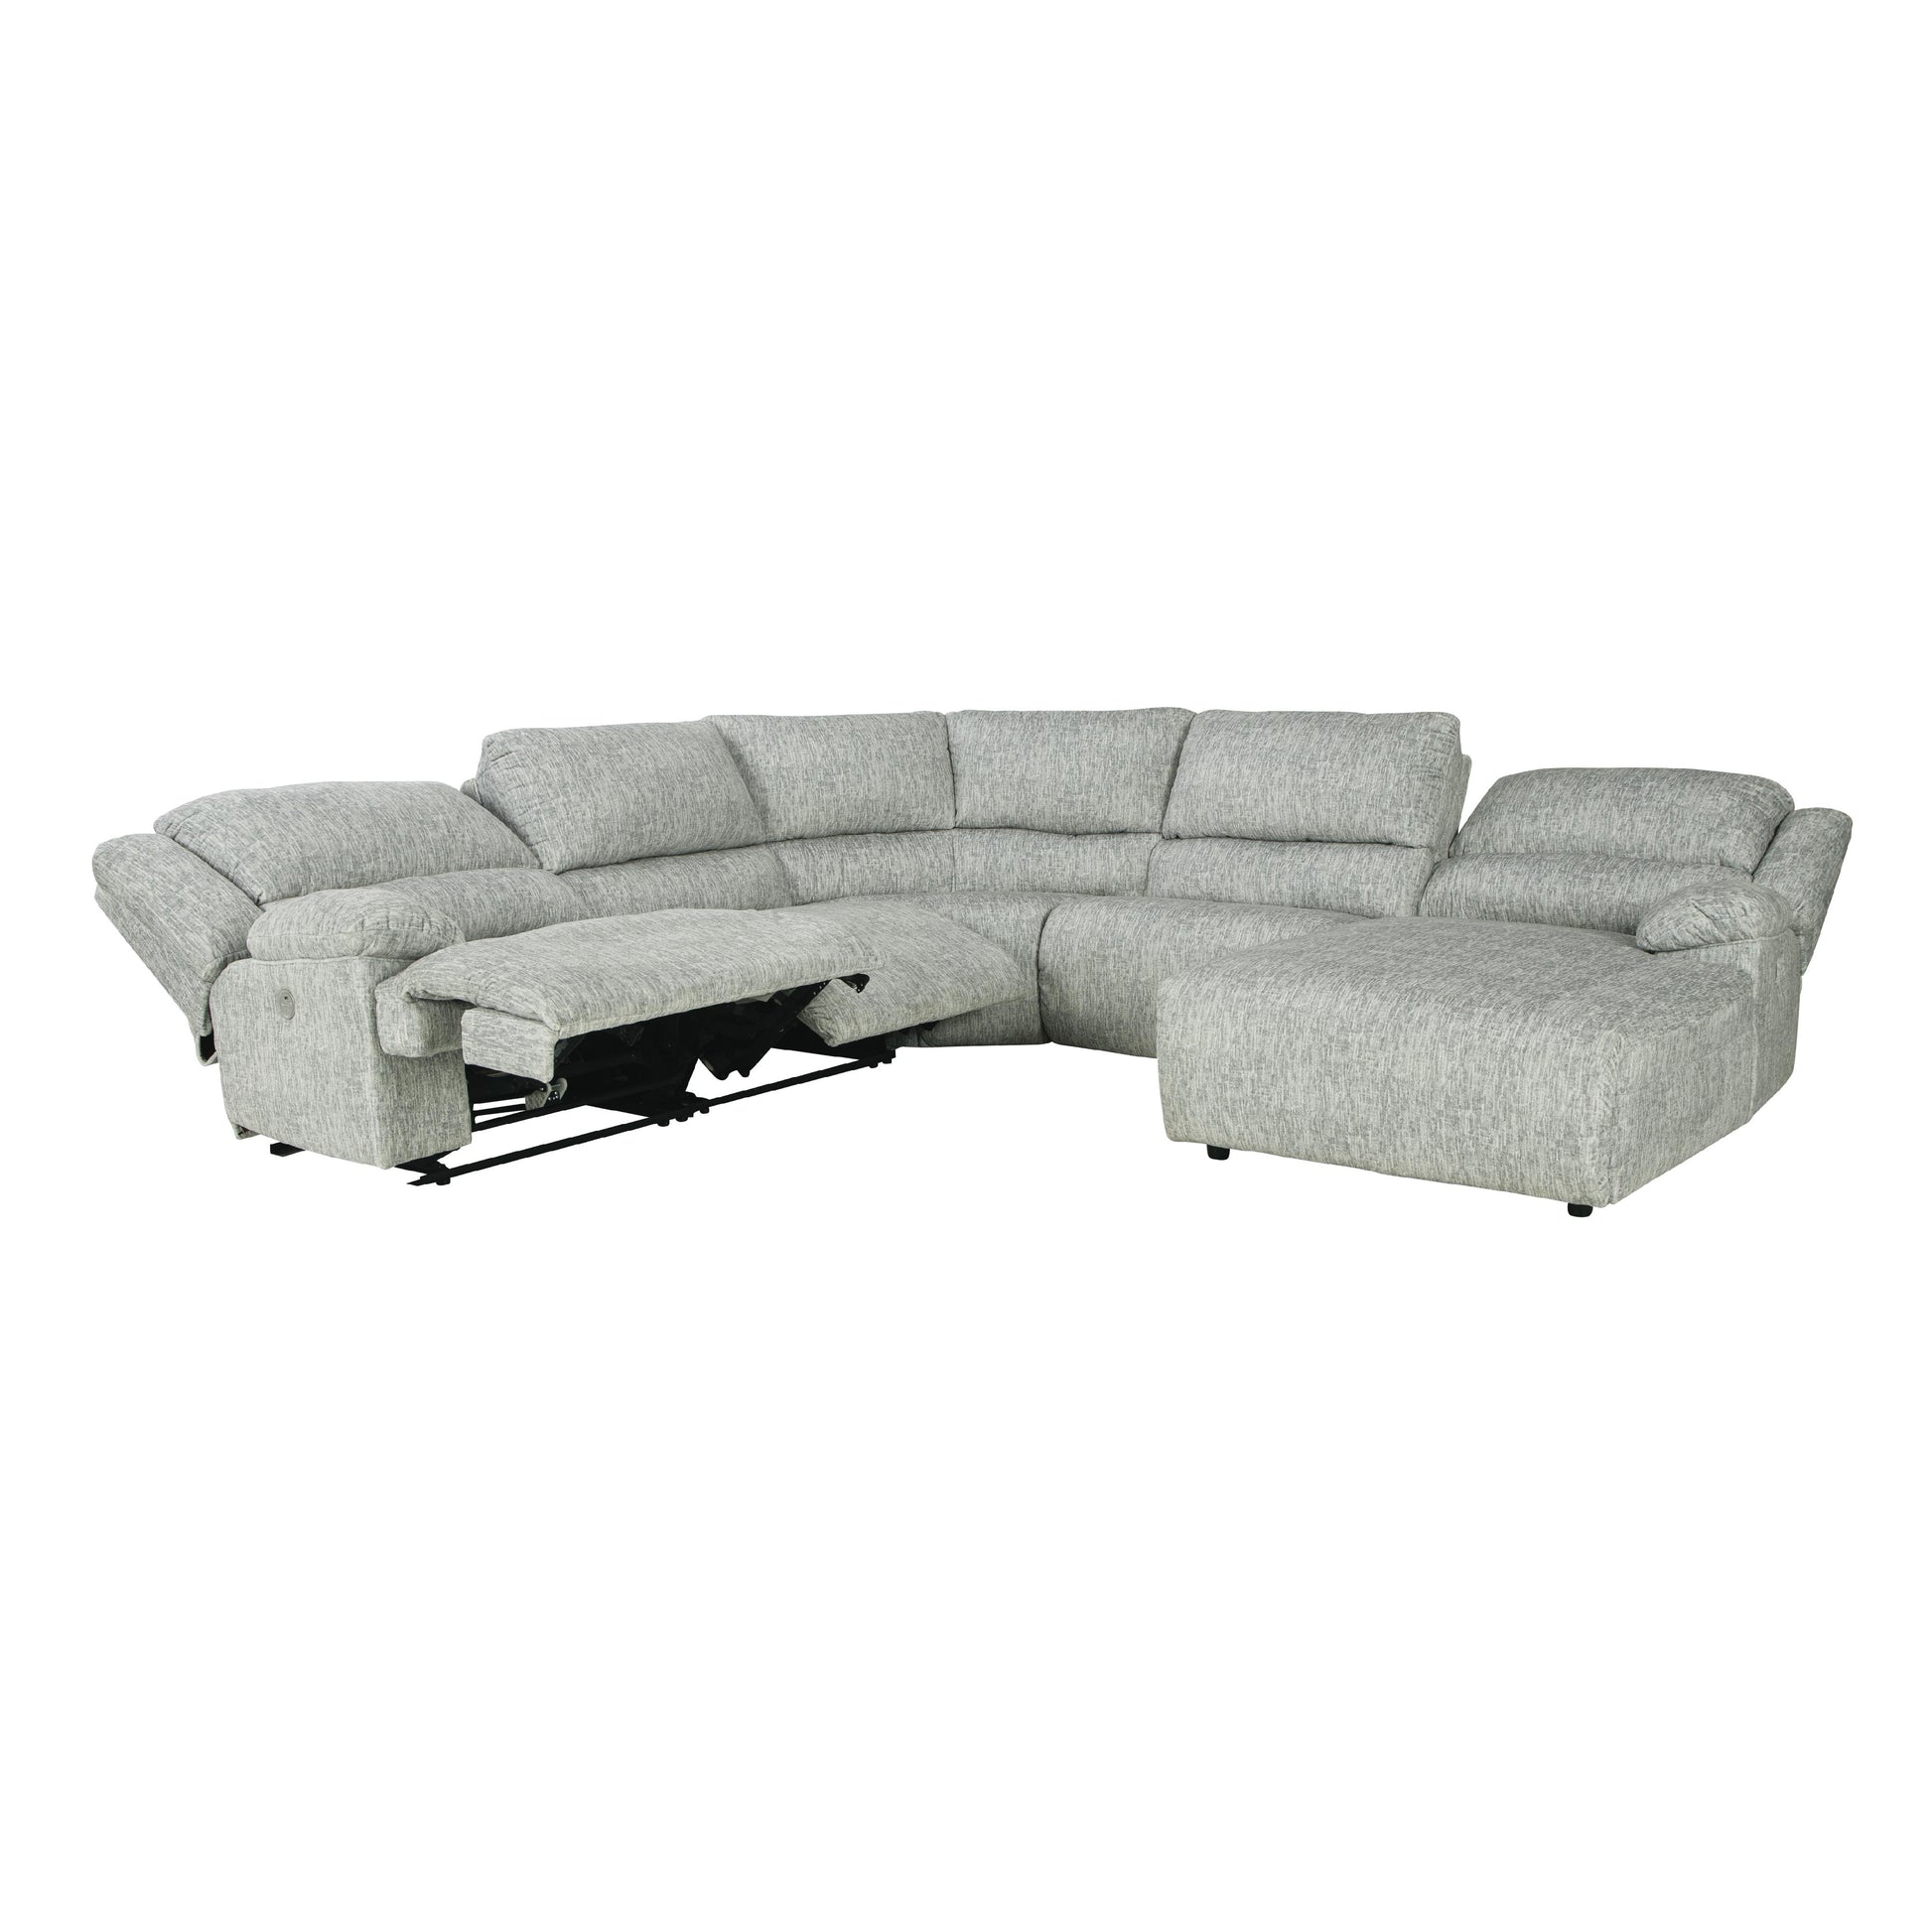 Signature Design by Ashley McClelland Power Reclining Fabric 5 pc Sectional 2930258/2930219/2930277/2930246/2930297 IMAGE 2